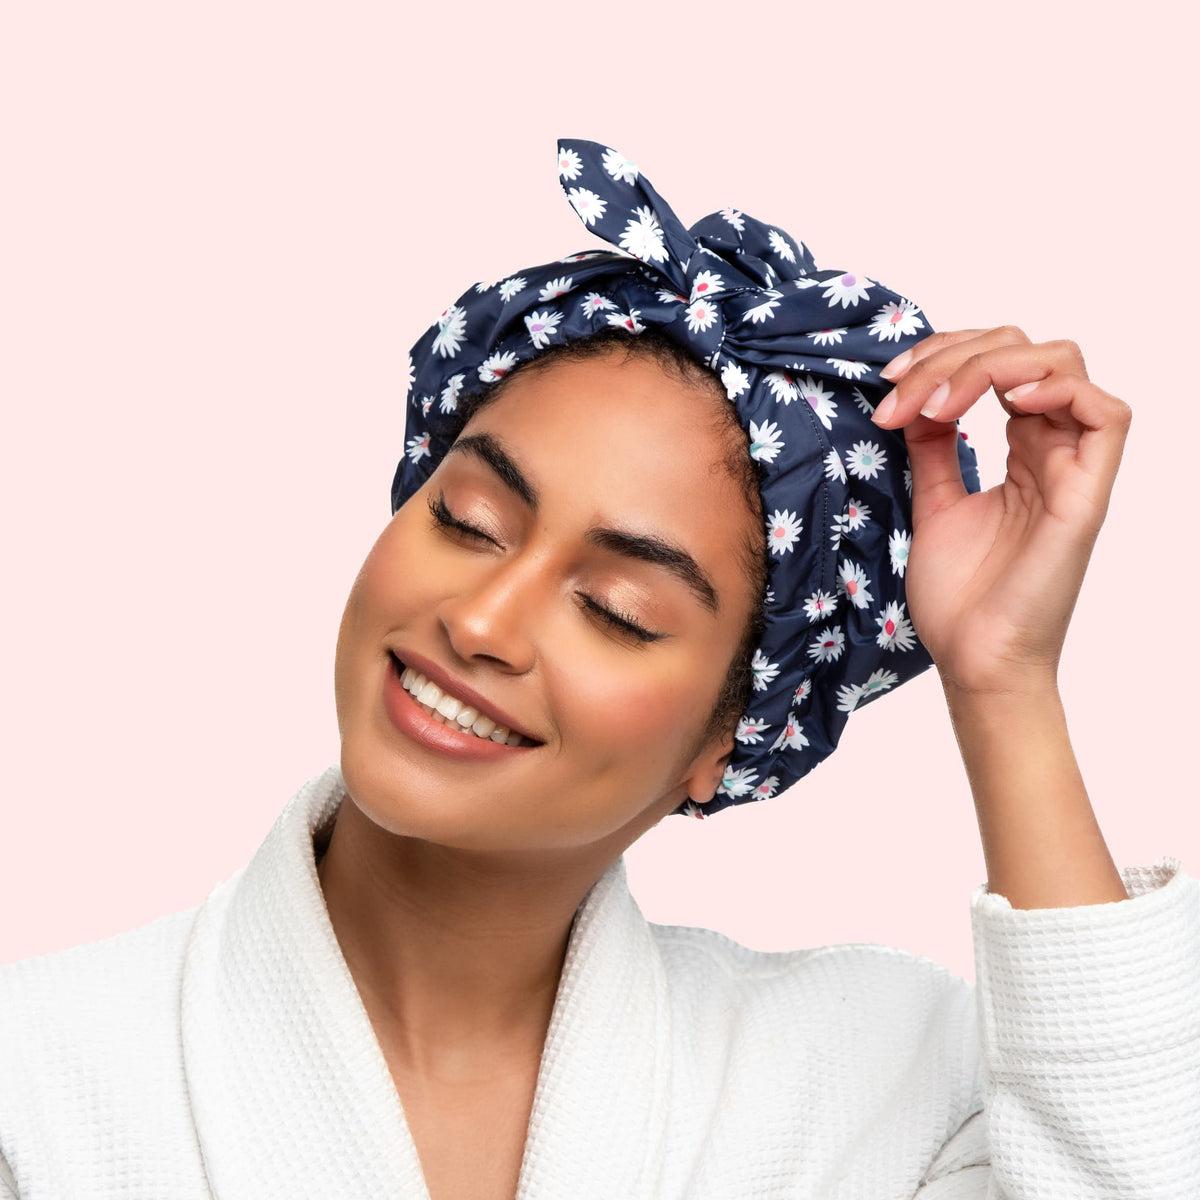 Only Curls Shower Cap - Navy Daisy - Only Curls